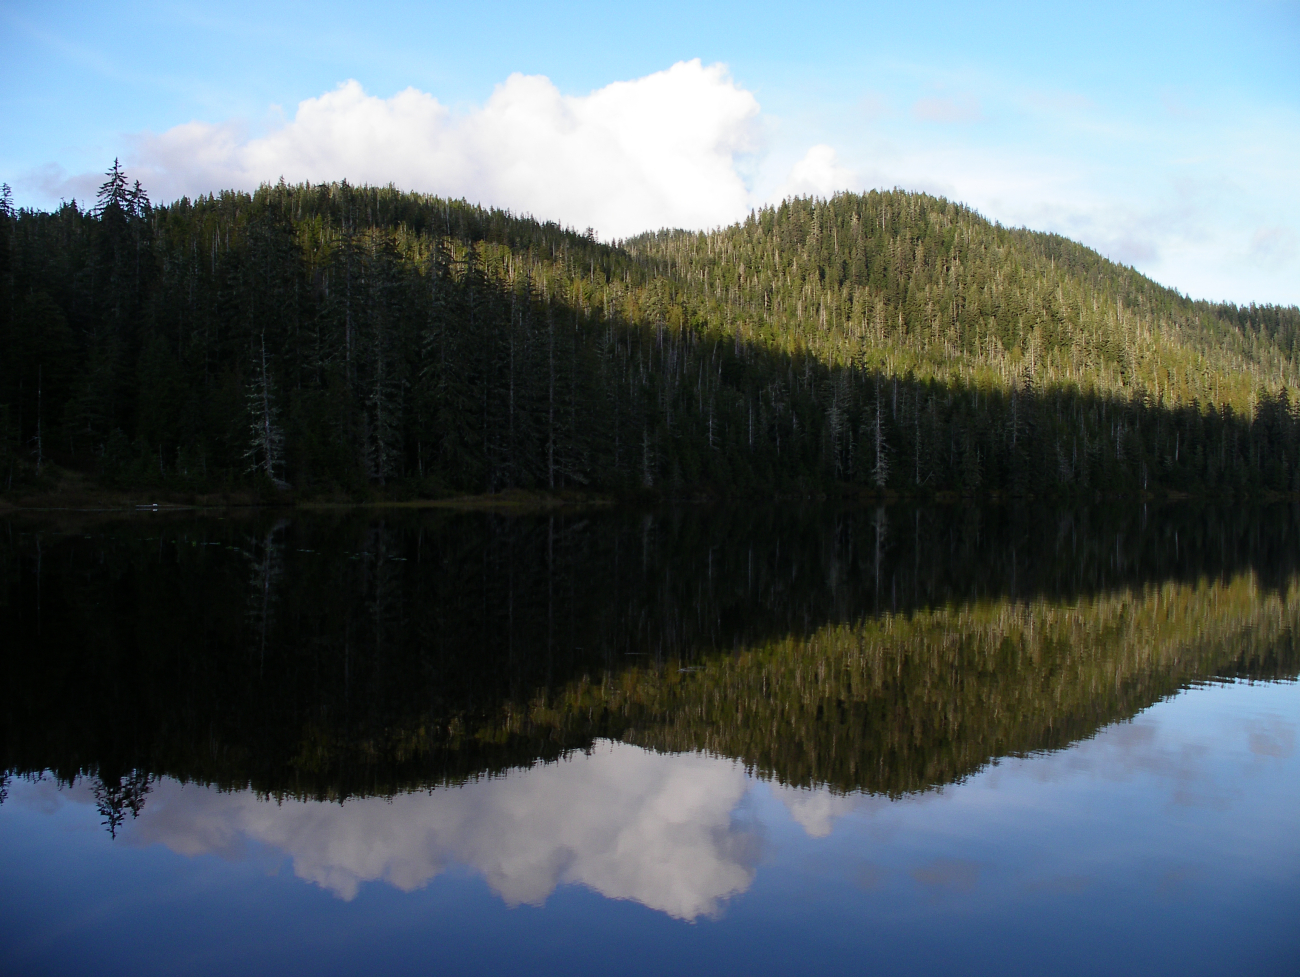 A still evening with reflections at Harriet Hunt Lake near Ketchikan